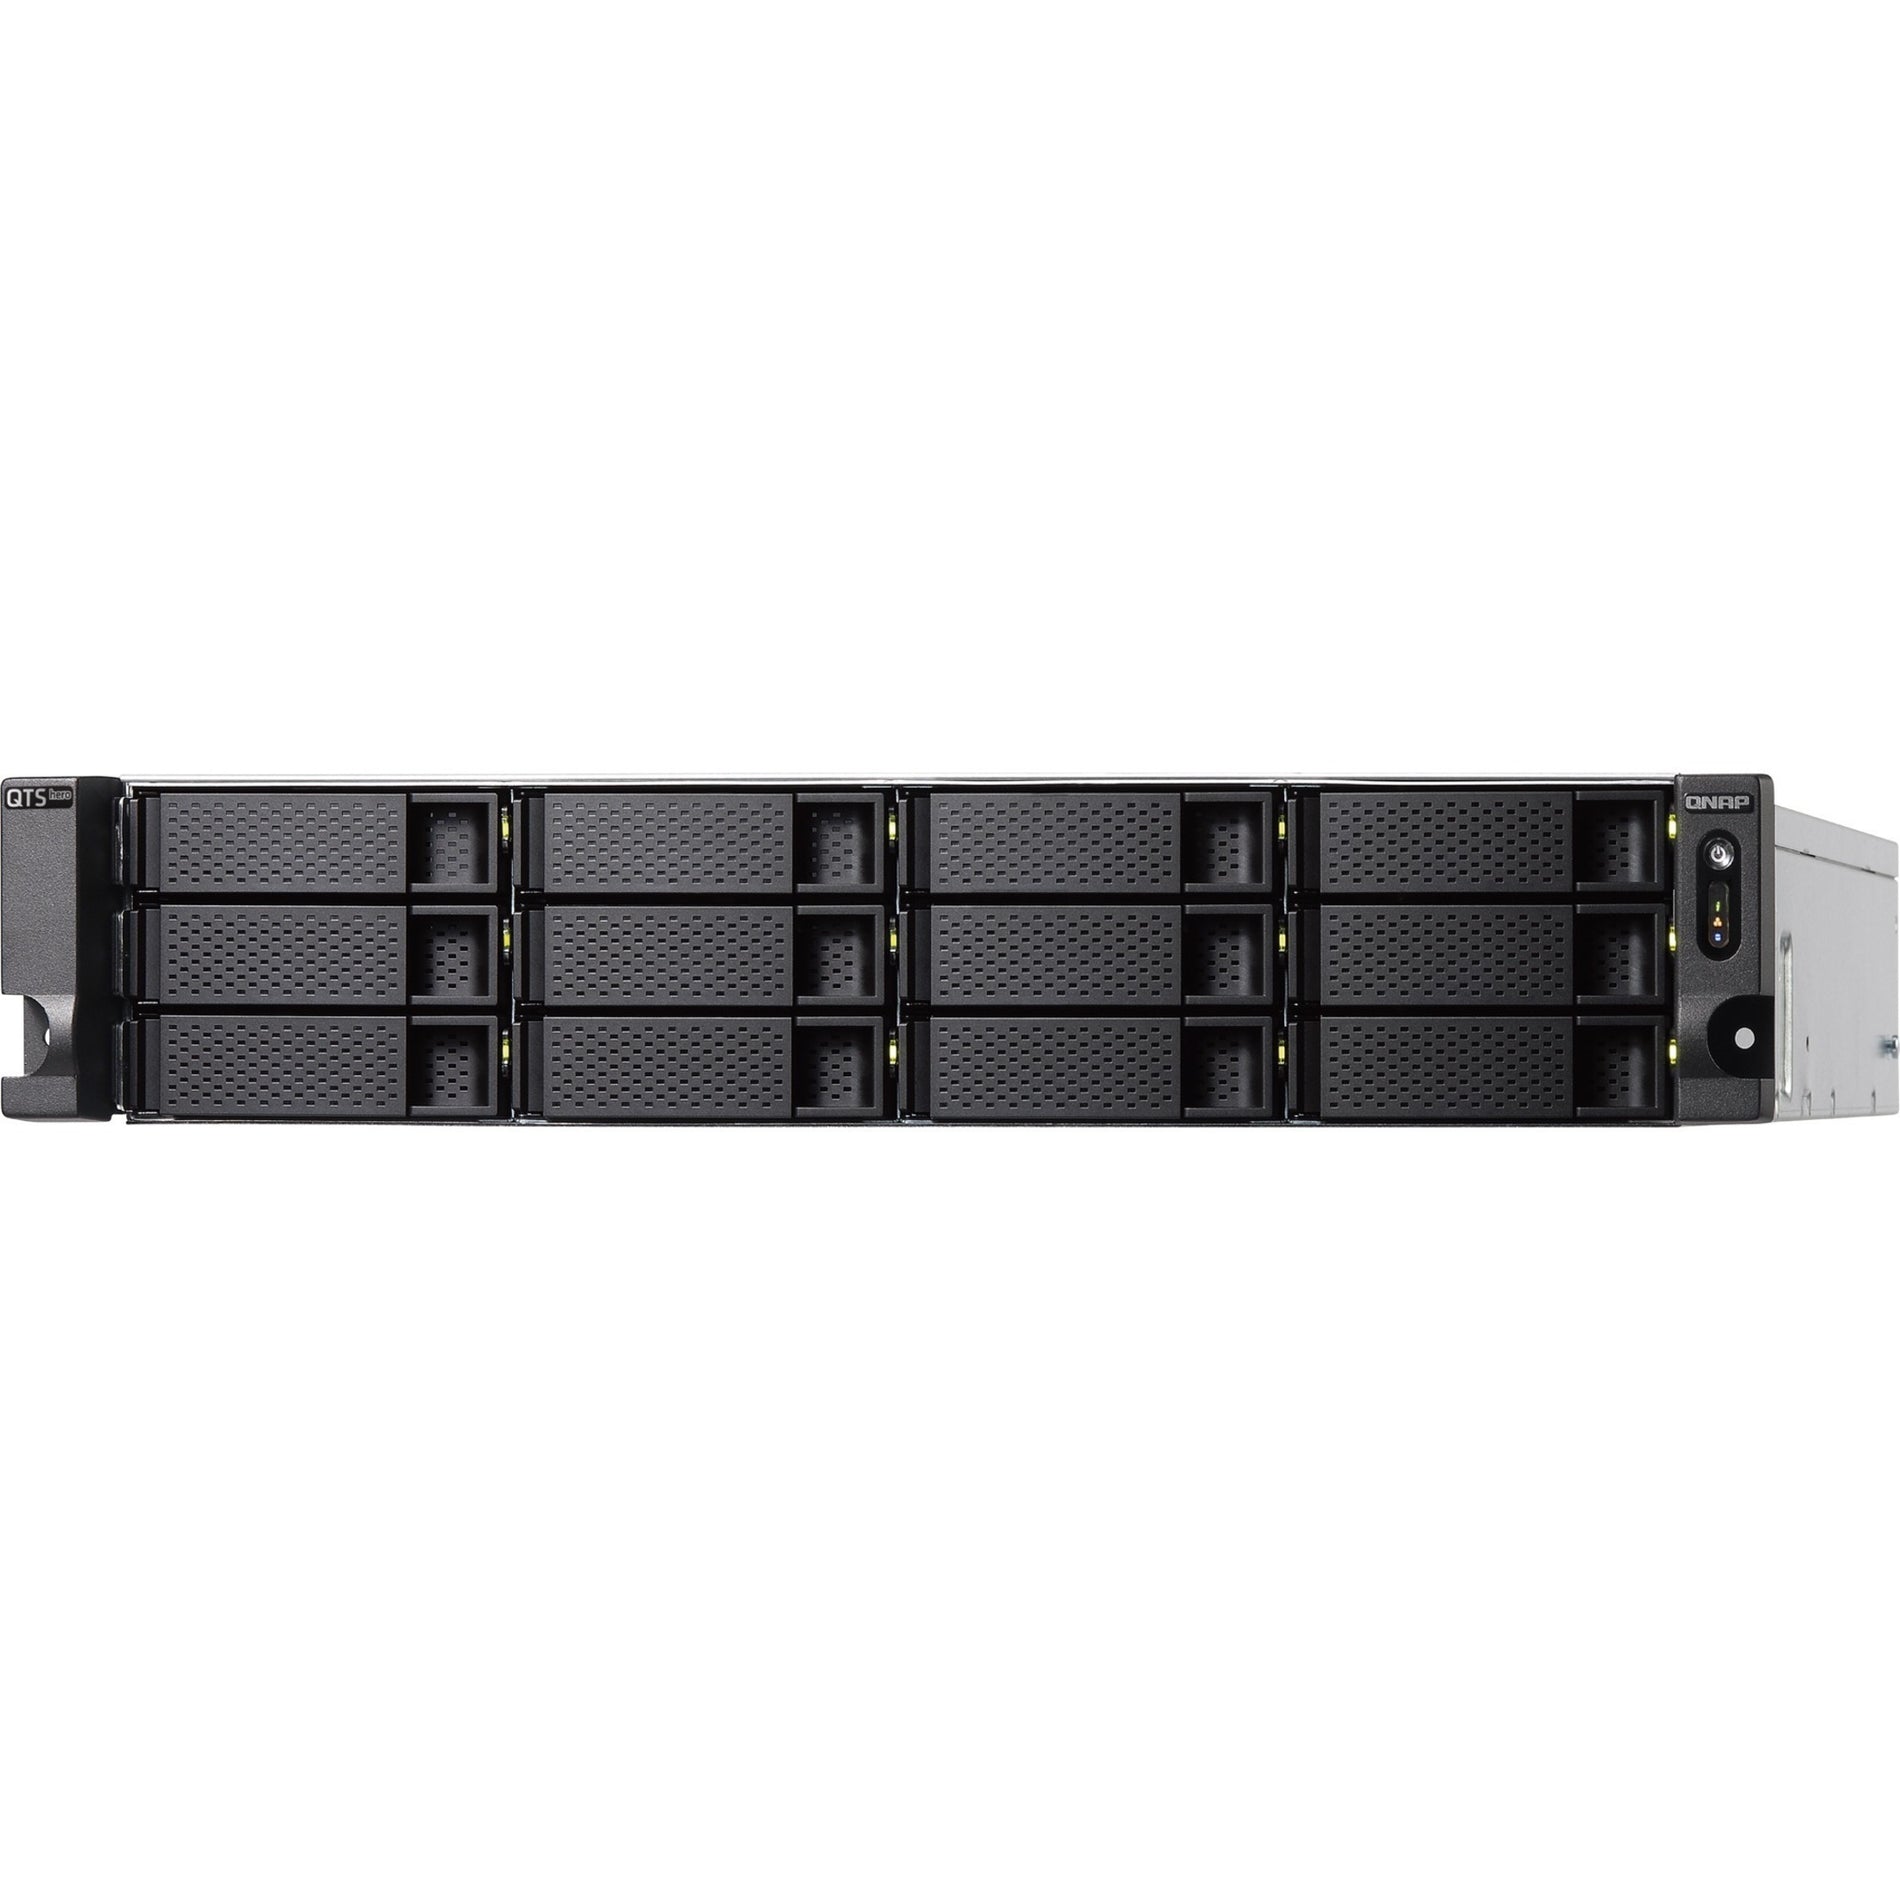 QNAP TS-H1283XU-RP-E2236-32G TS-h1283XU-RP-E2236-32G SAN/NAS Storage System, High Performance and Reliable Data Storage Solution